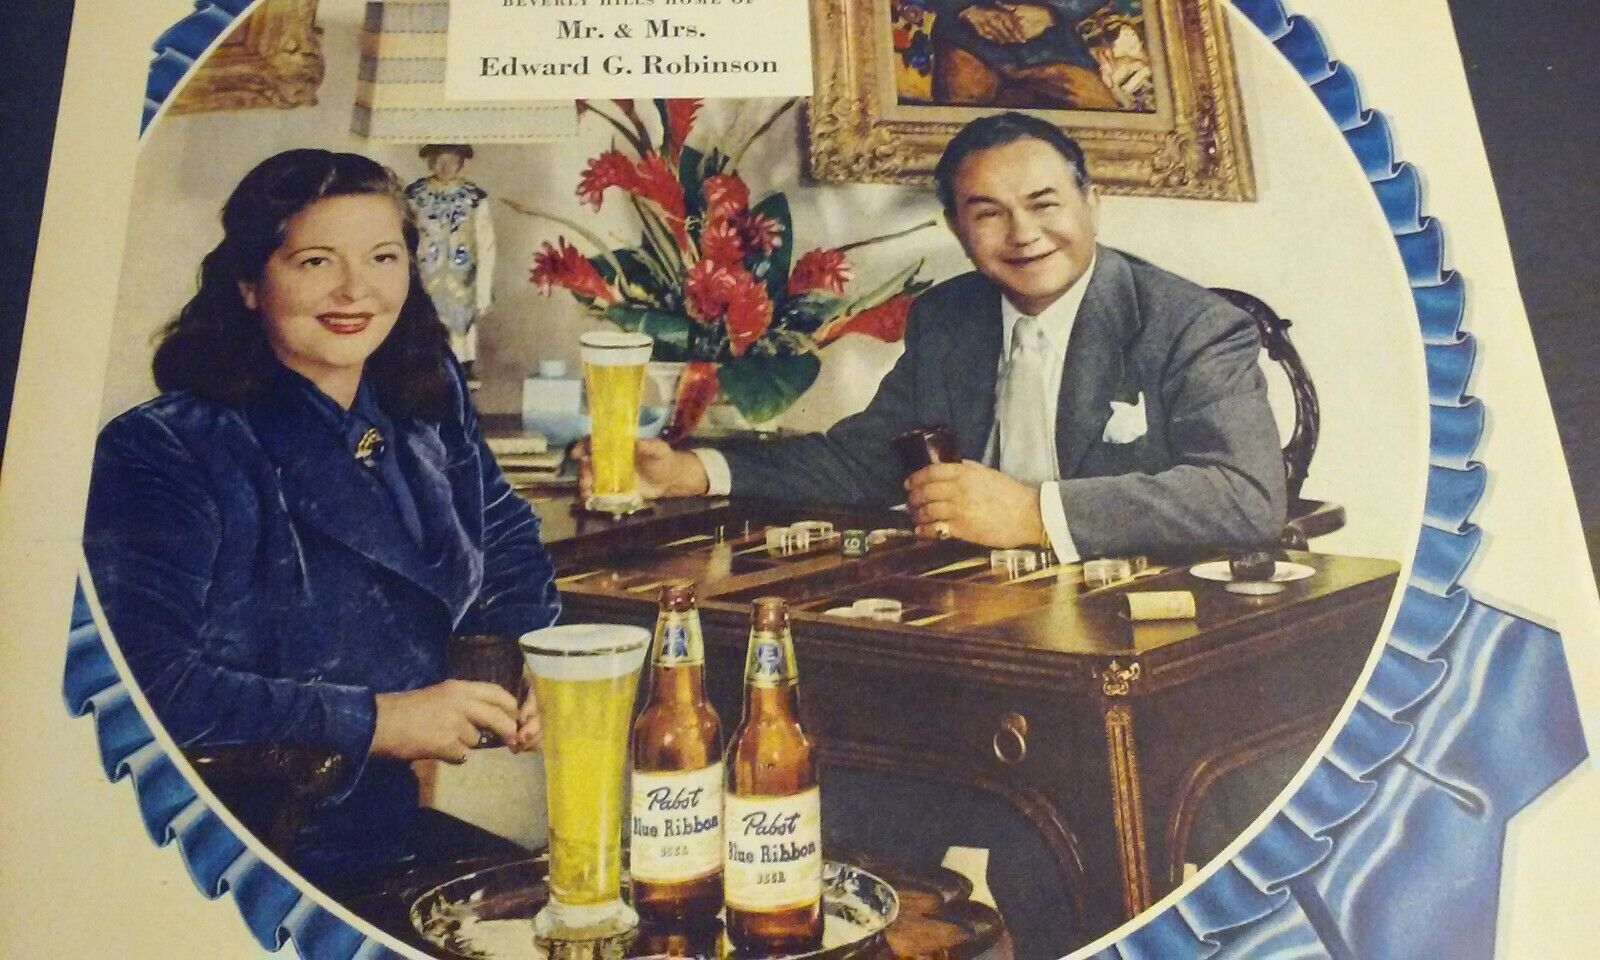 1949 Magazine Color Ad w/ Mr. & Mrs. EDWARD G. ROBINSON PABST Blue Ribbon Beer